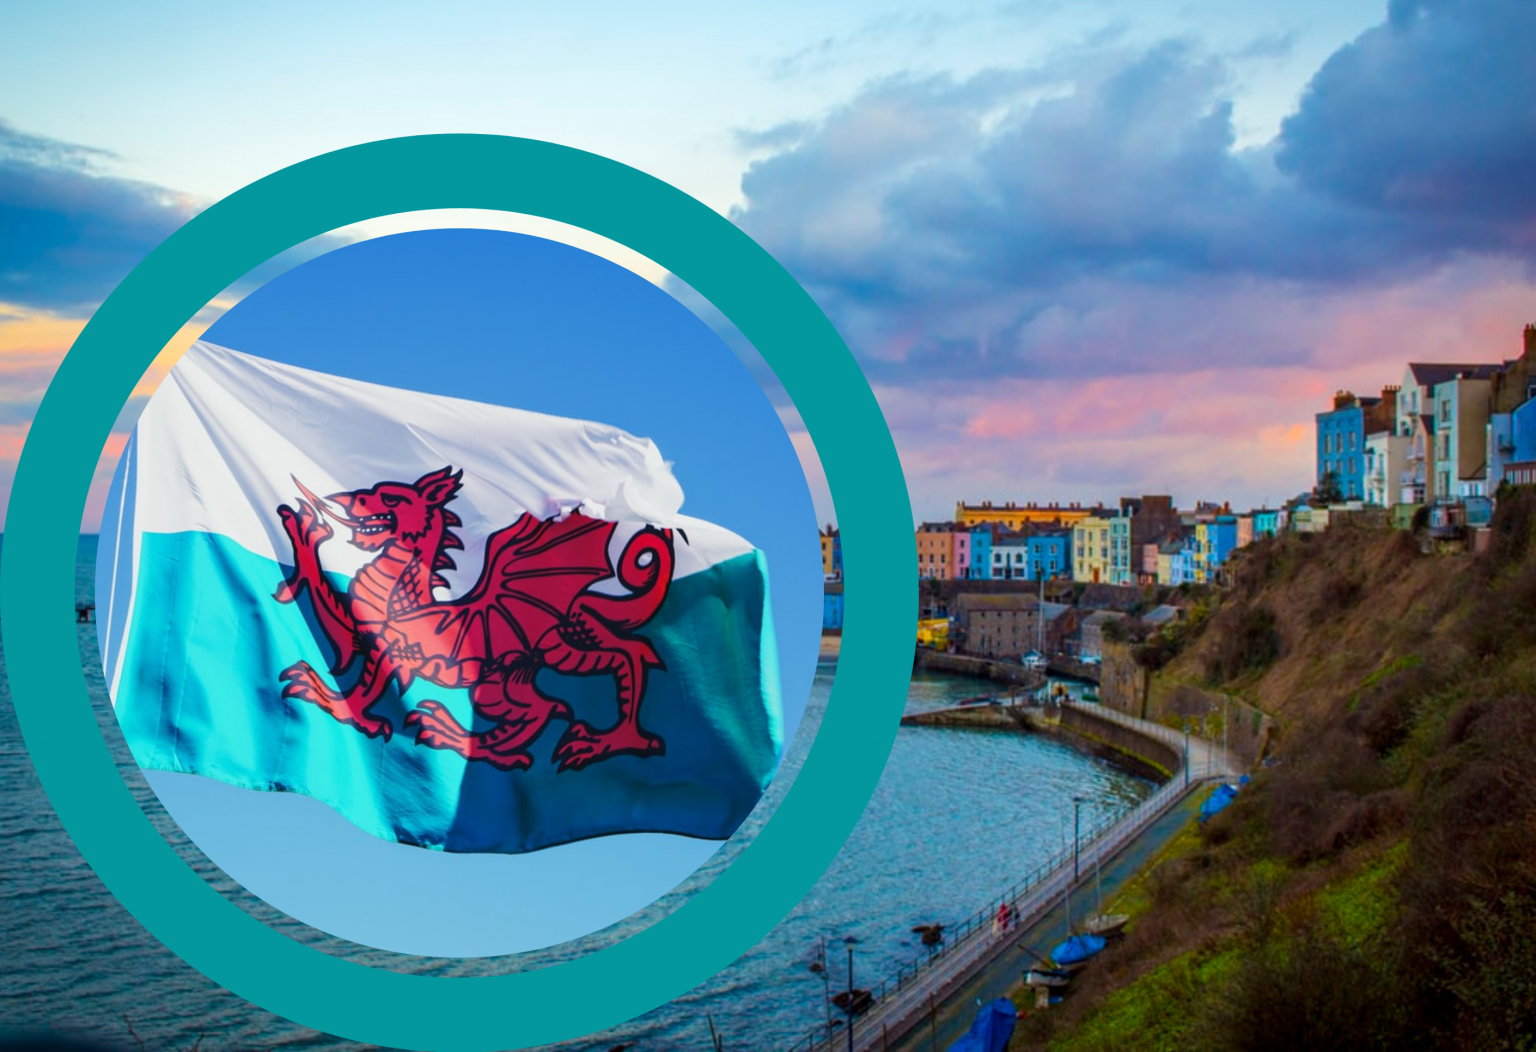 NEWS | COVID-19 restrictions to remain in force in Wales due to ‘extremely high’ levels of infection